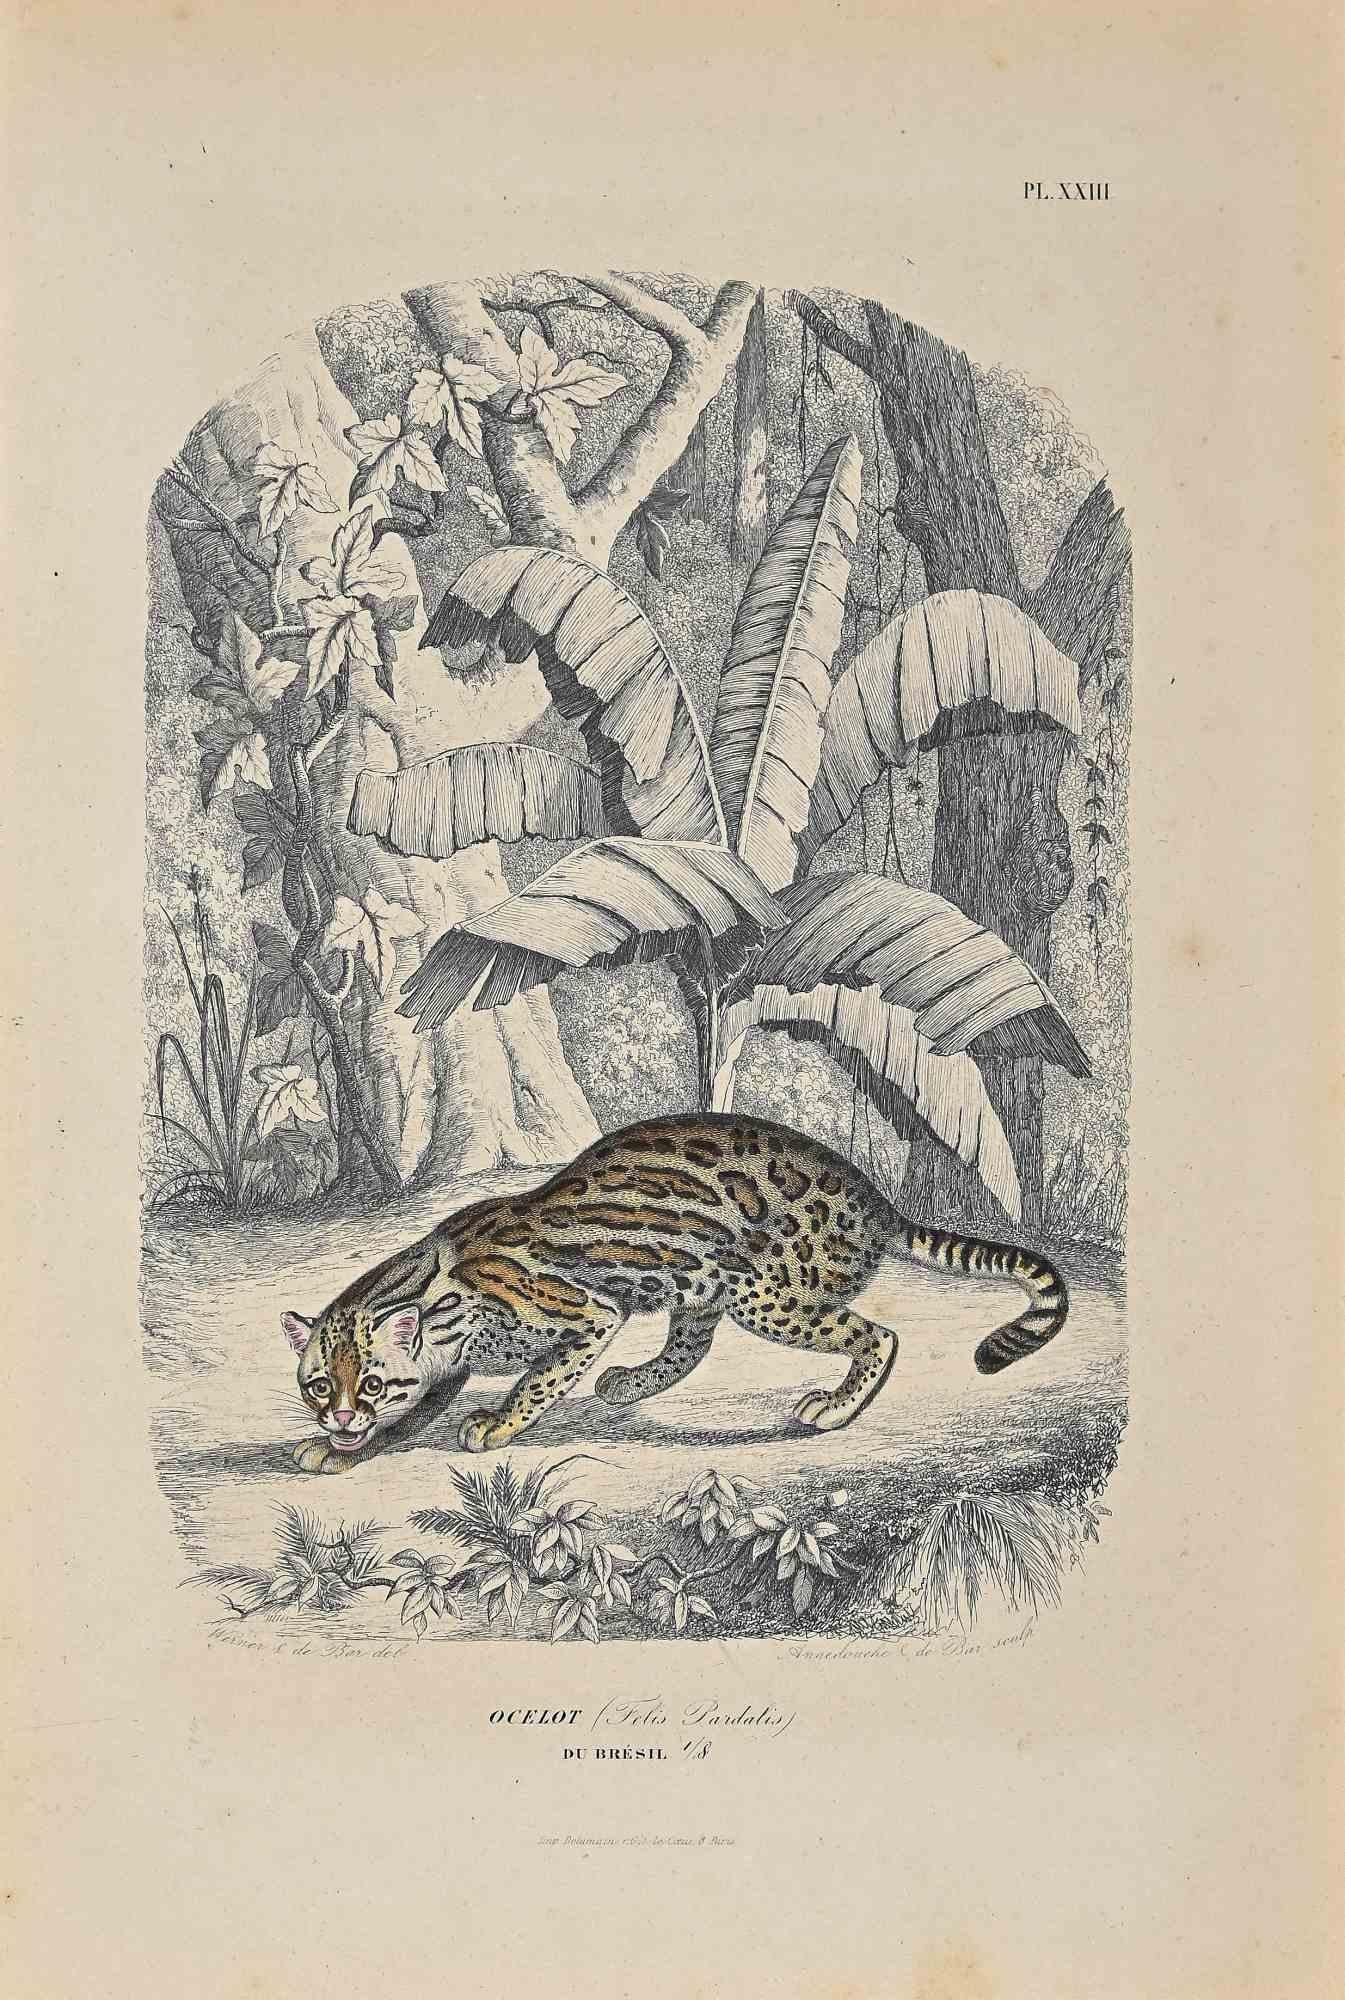 Ocelot is an original lithograph on ivory-colored paper, realized by Paul Gervais (1816-1879). The artwork is from The Series of "Les Trois Règnes de la Nature", and was published in 1854.

Good conditions except for some foxings.

Titled on the